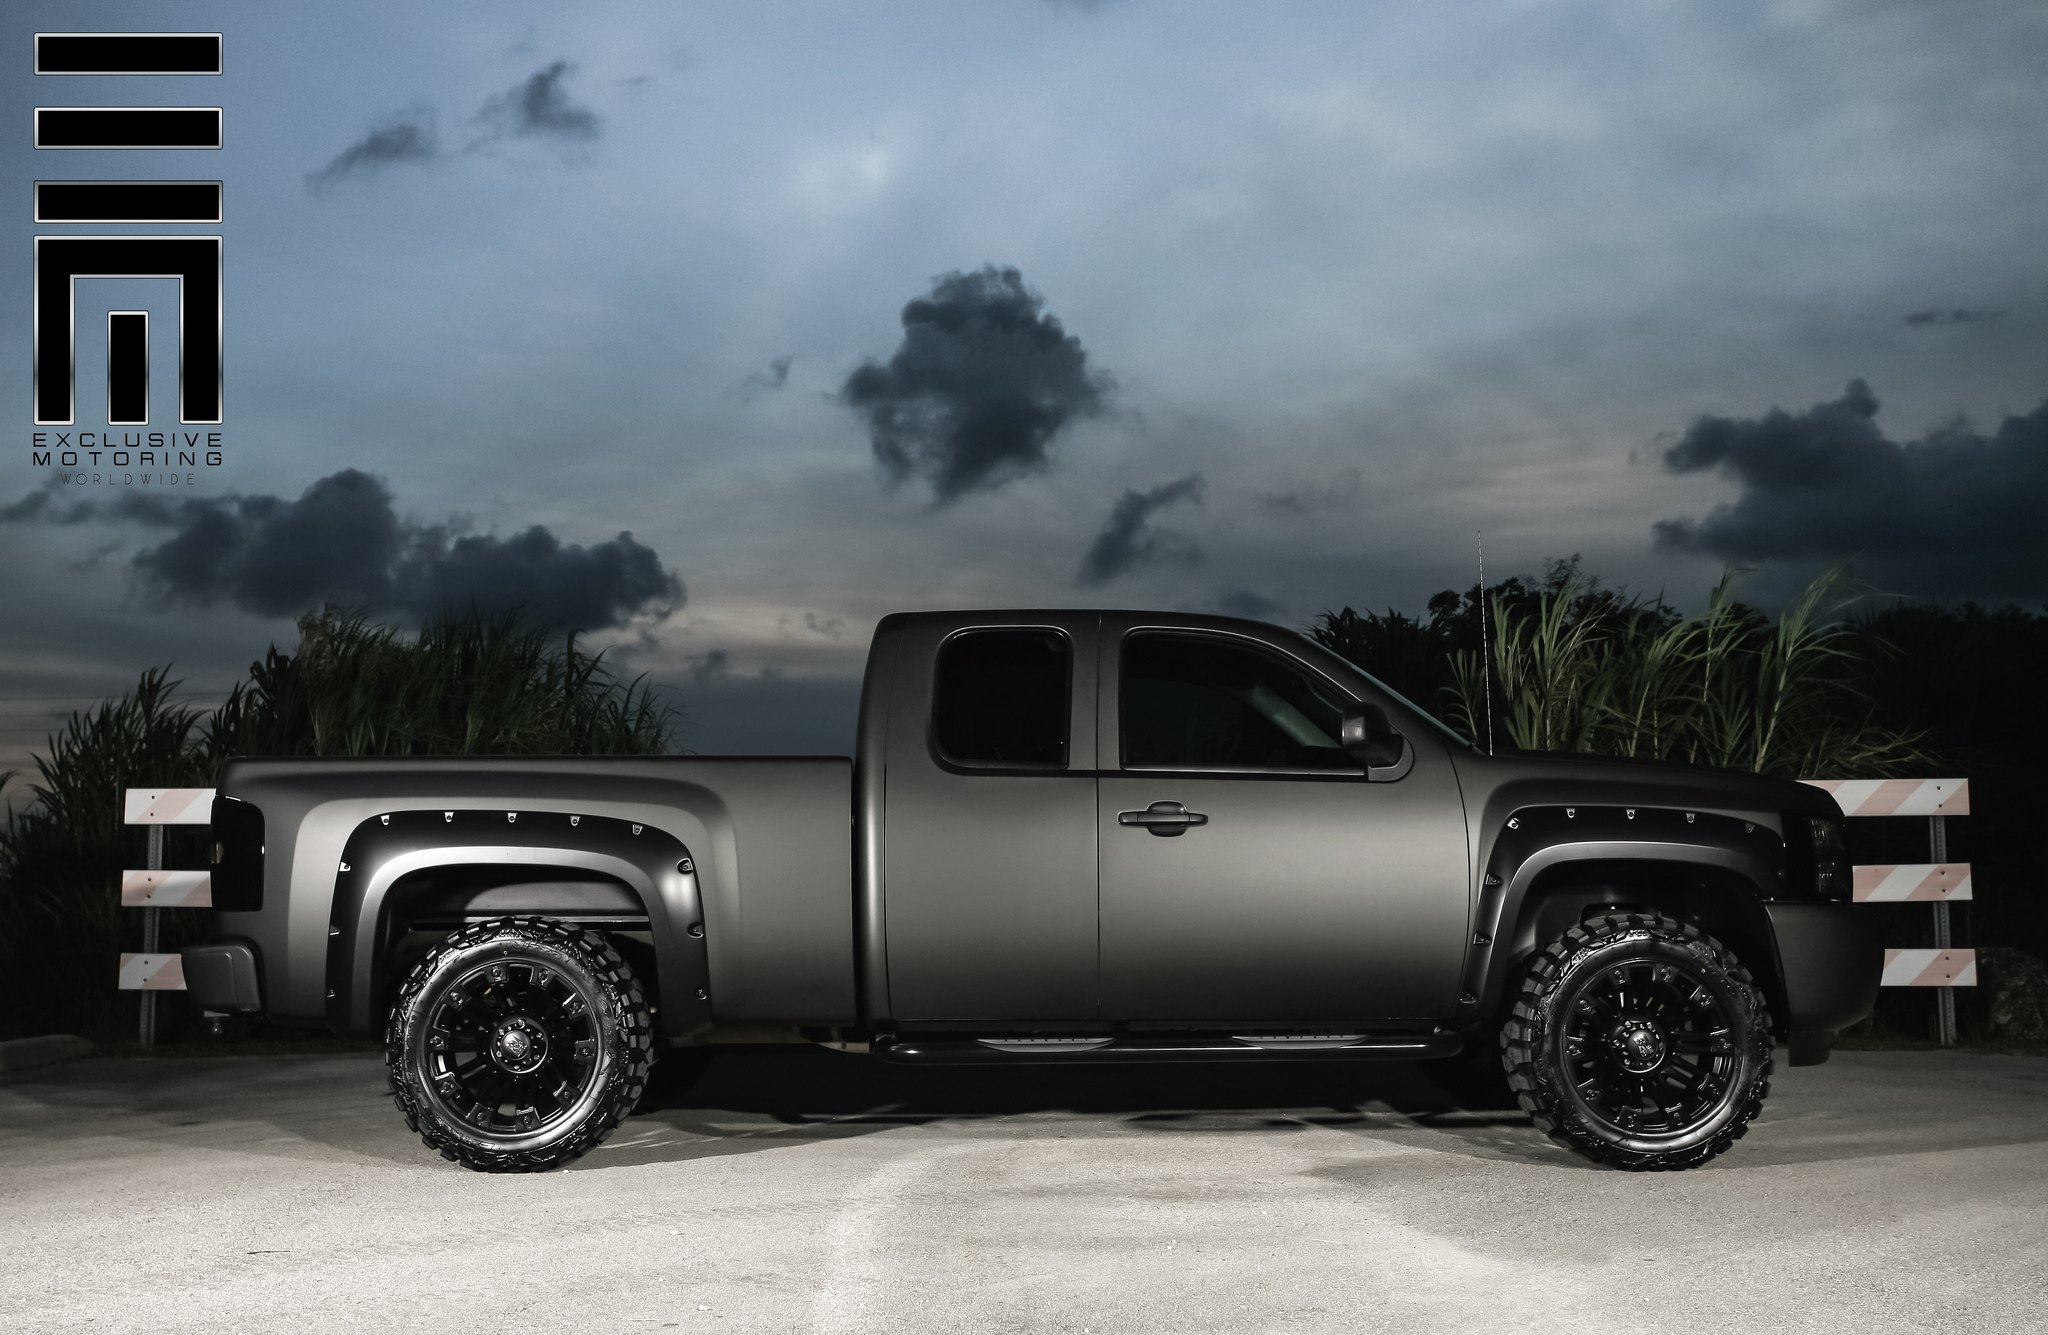 Lifted Silverado and fitted with Bushwacker fender flares - Photo by Exclusive Motoring